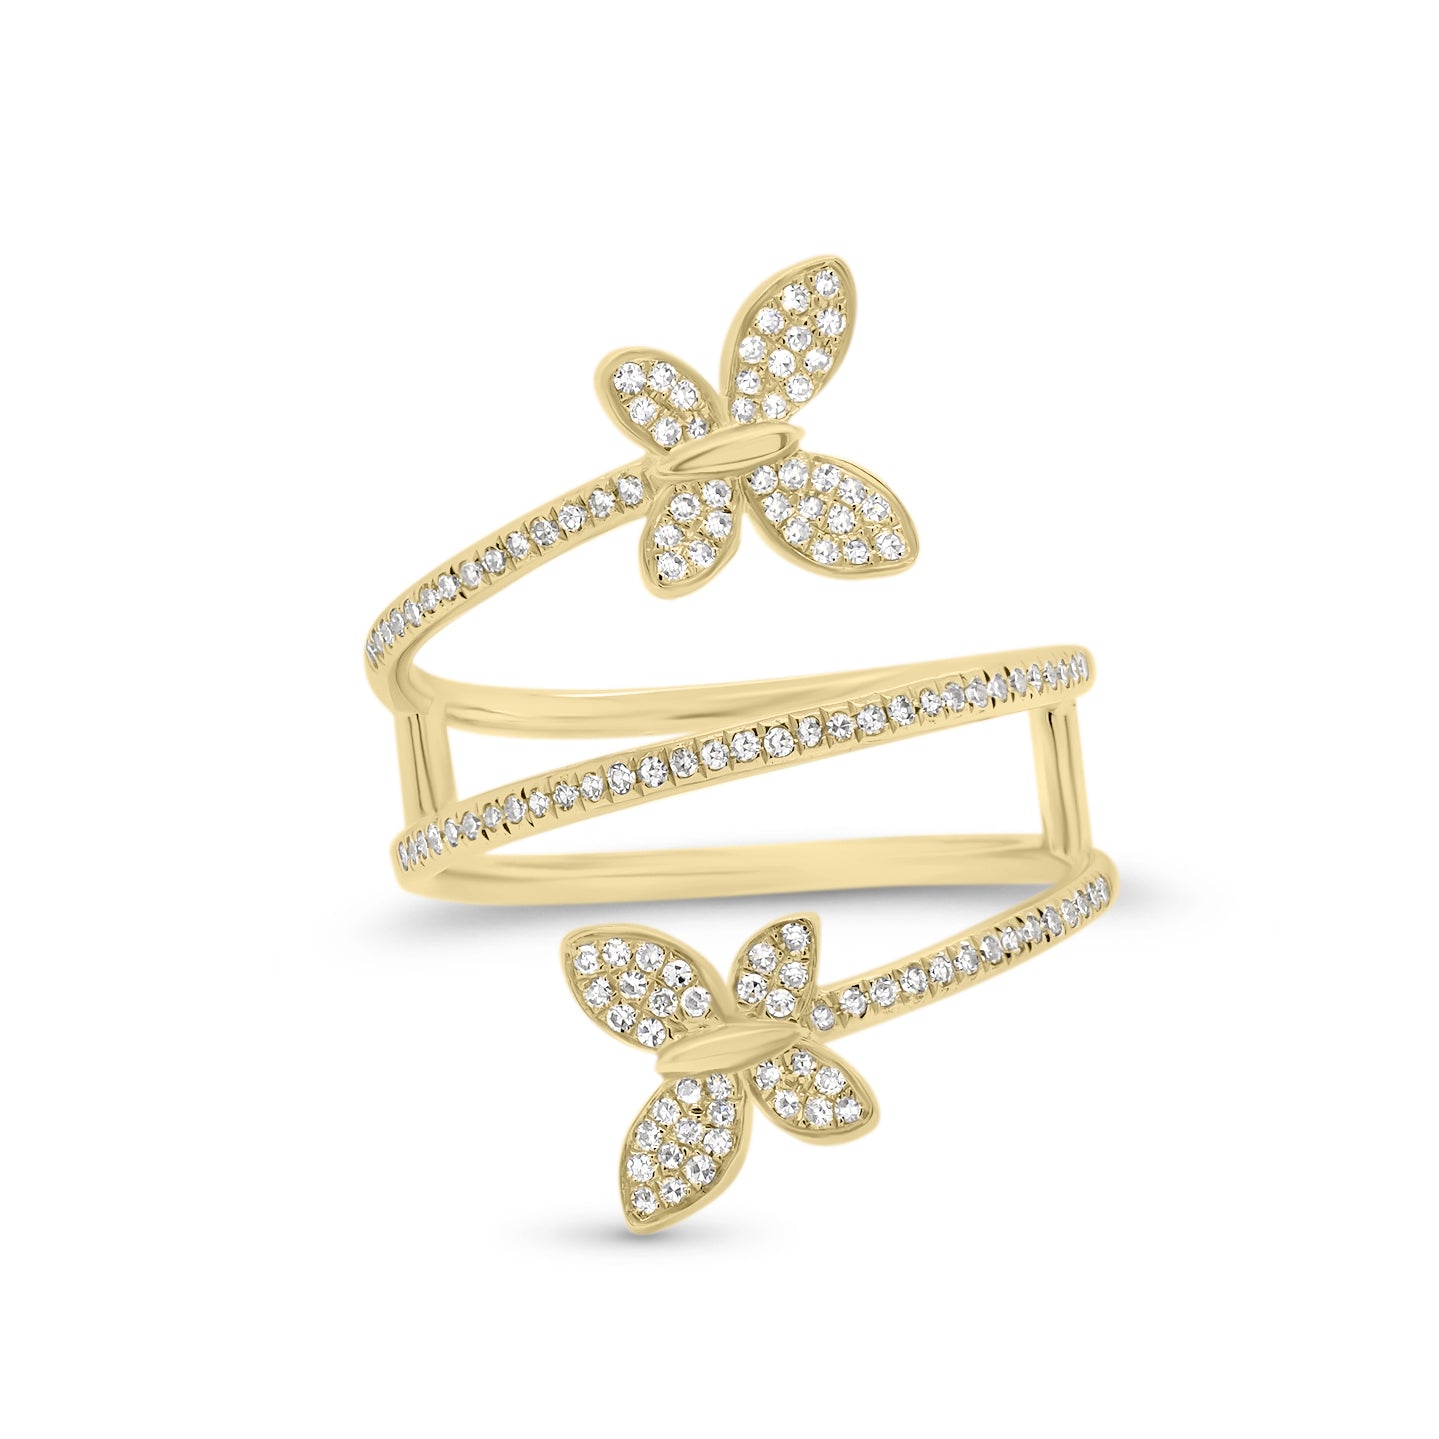 Diamond Butterfly Wrap Ring  - 14K gold weighing 3.48 grams  - 128 round diamonds totaling 0.28 carats